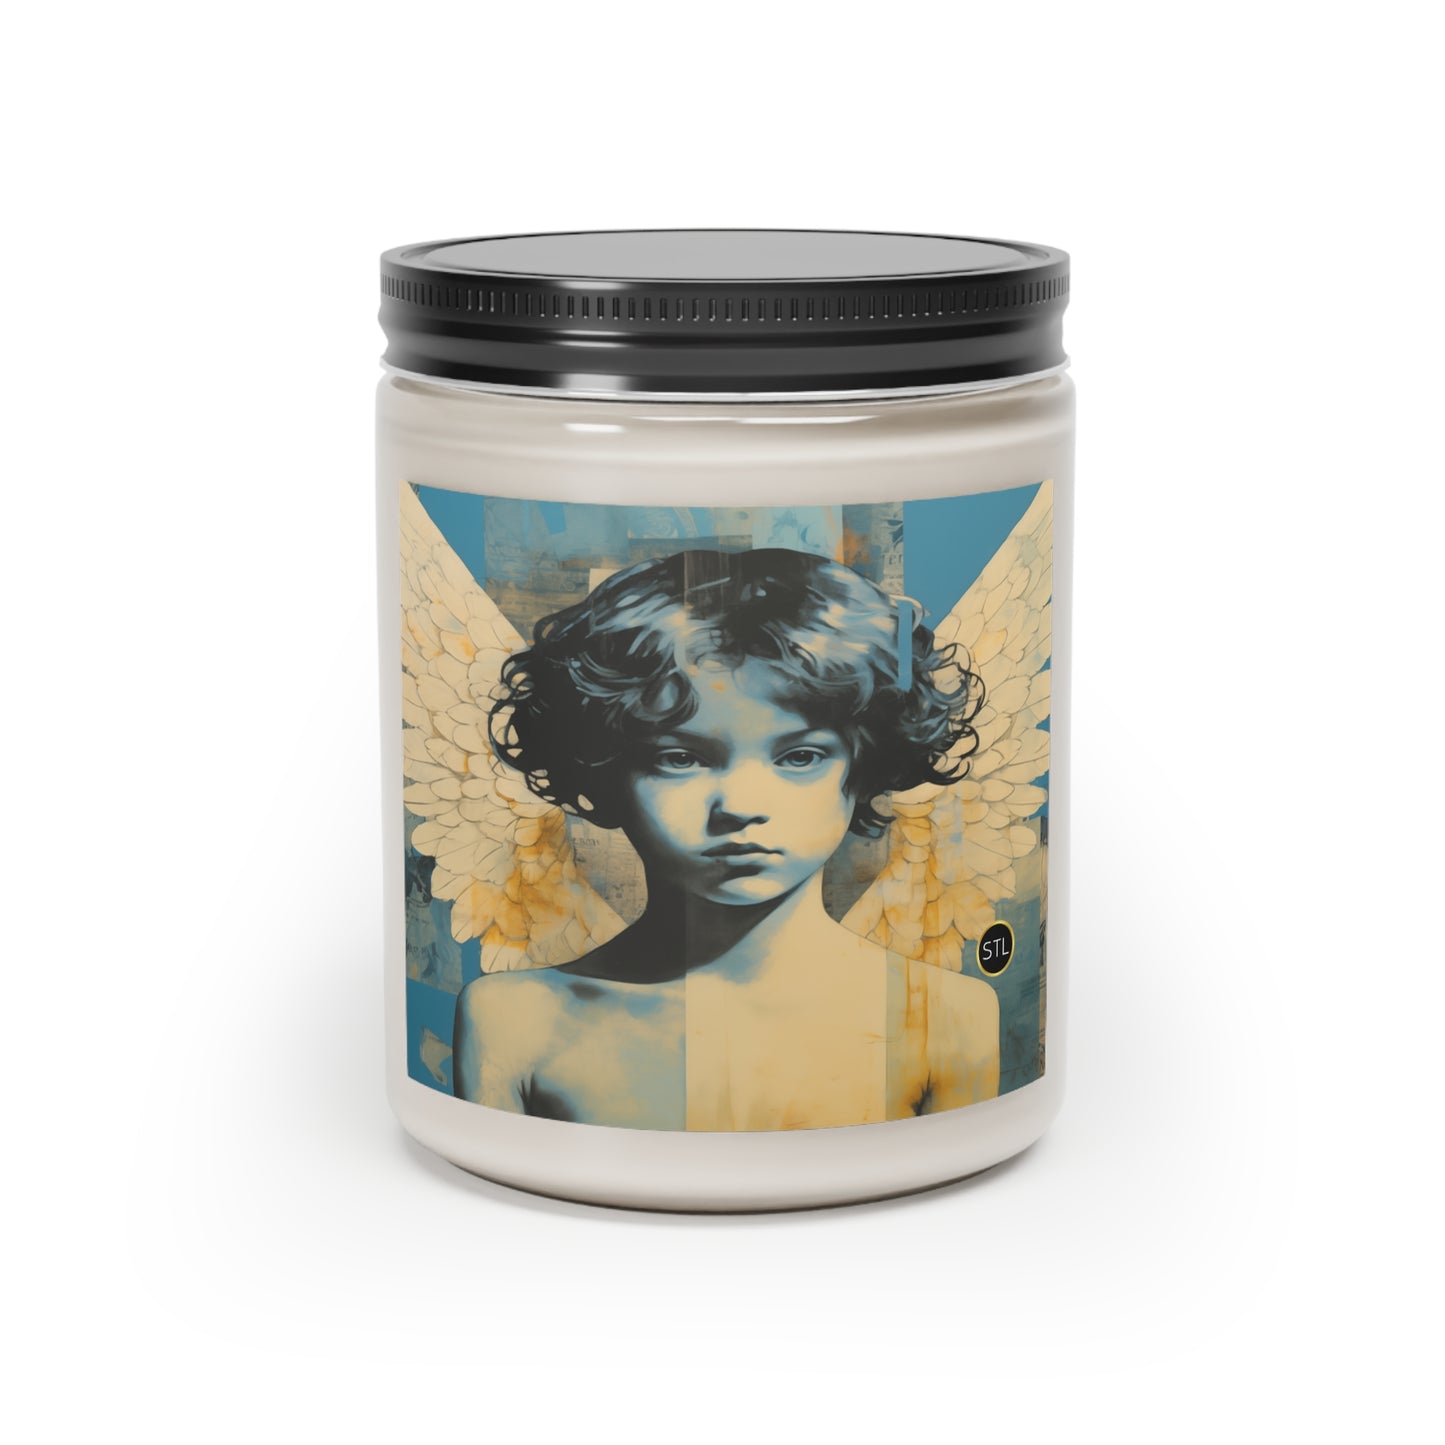 Angel Boy Hand-Poured Vegan Soy Scented Candle - Cinnamon, 9oz